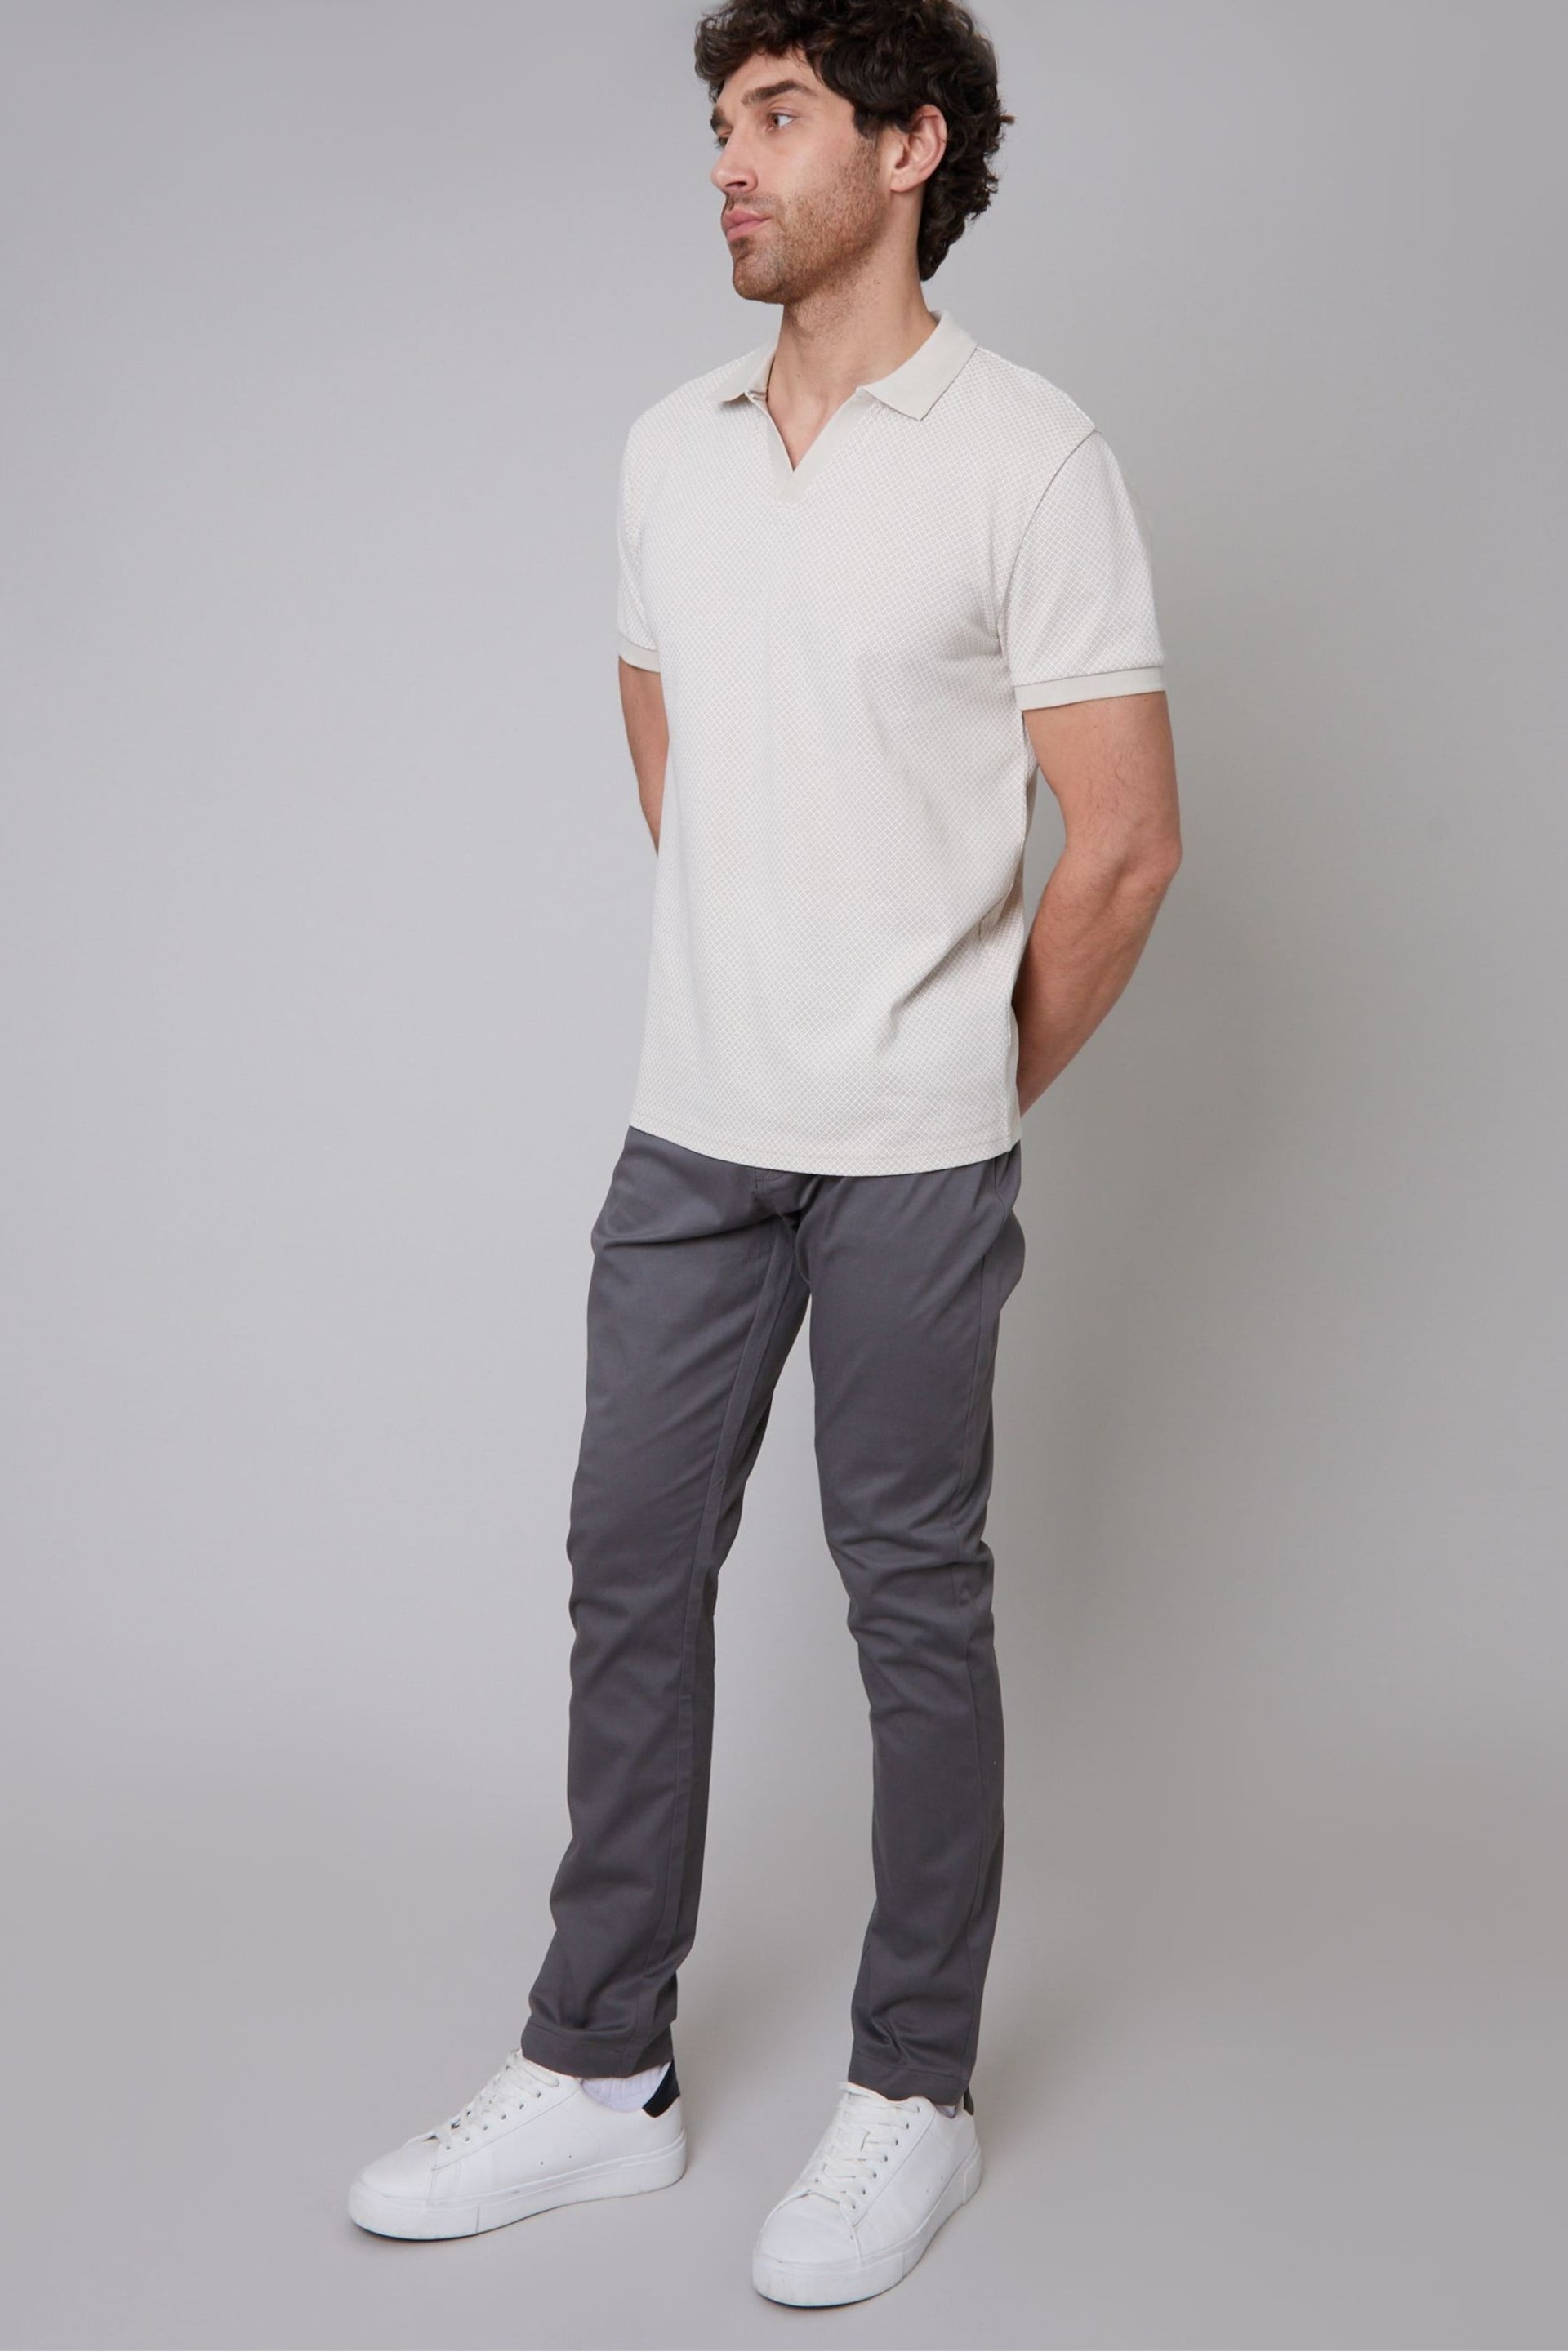 Threadbare Grey Cotton Slim Fit 5 Pocket Chino Trousers With Stretch - Image 3 of 4